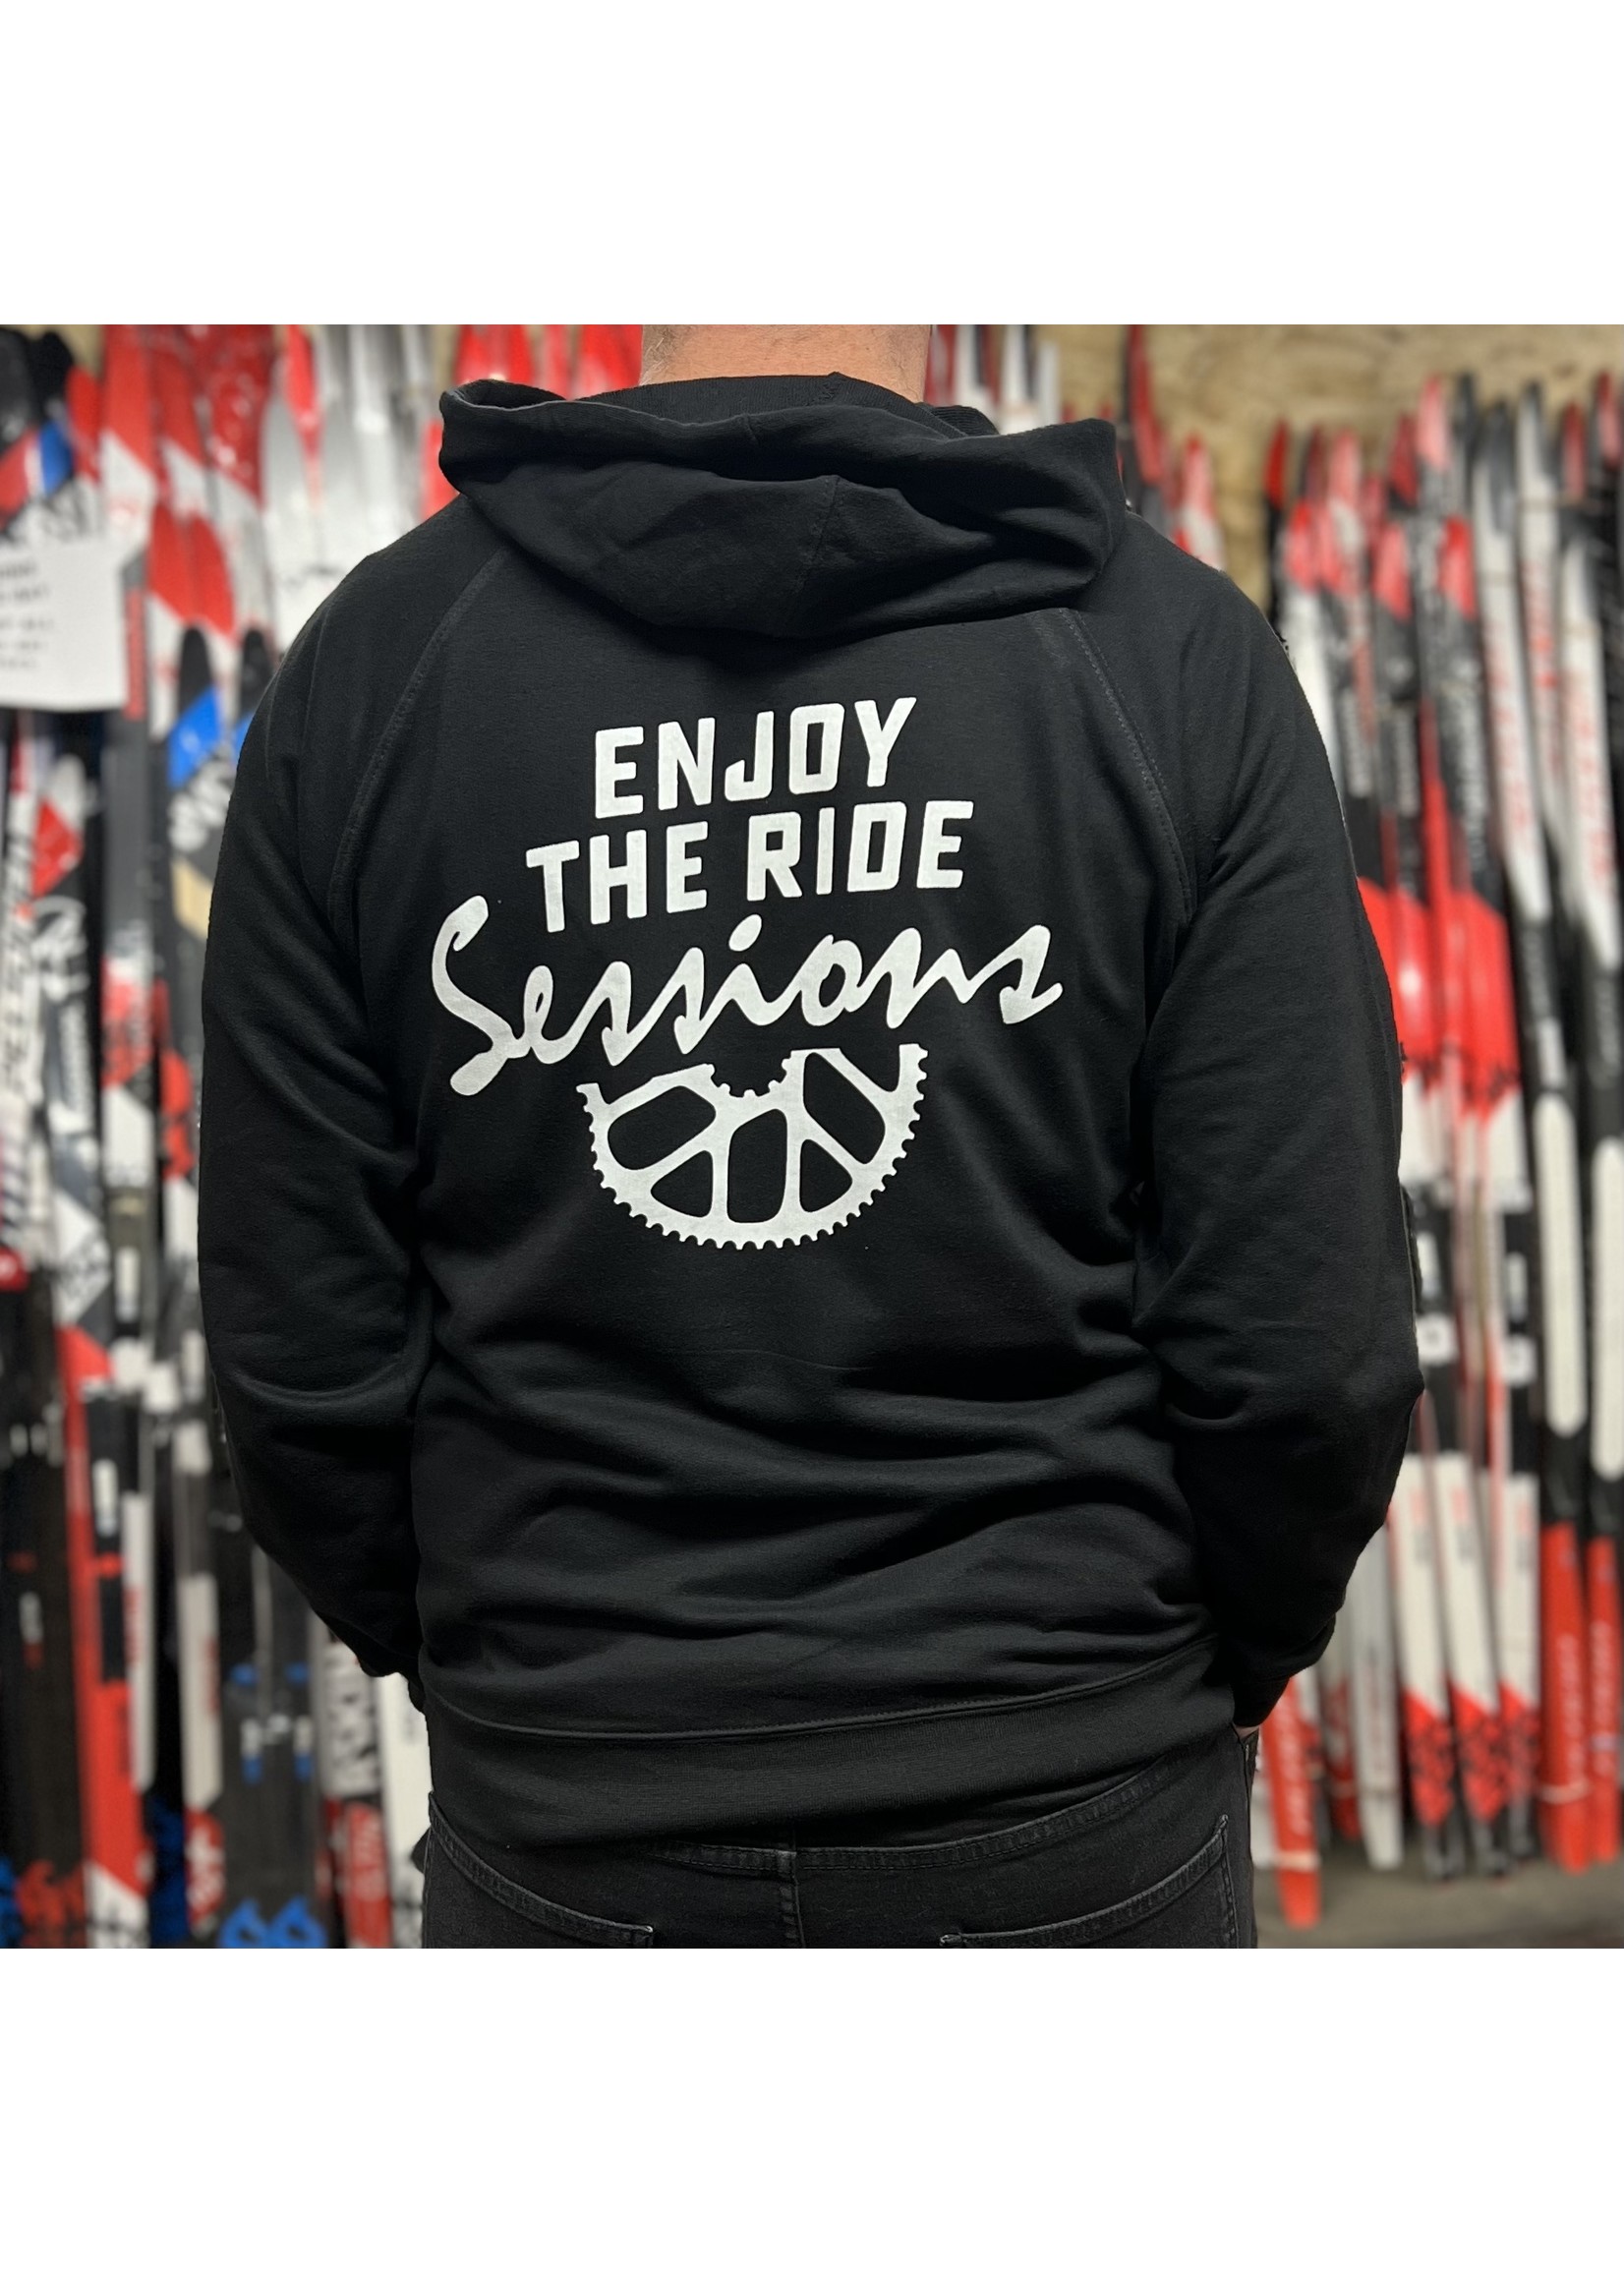 Sessions Sessions- Enjoy The Ride Hoodie, Black